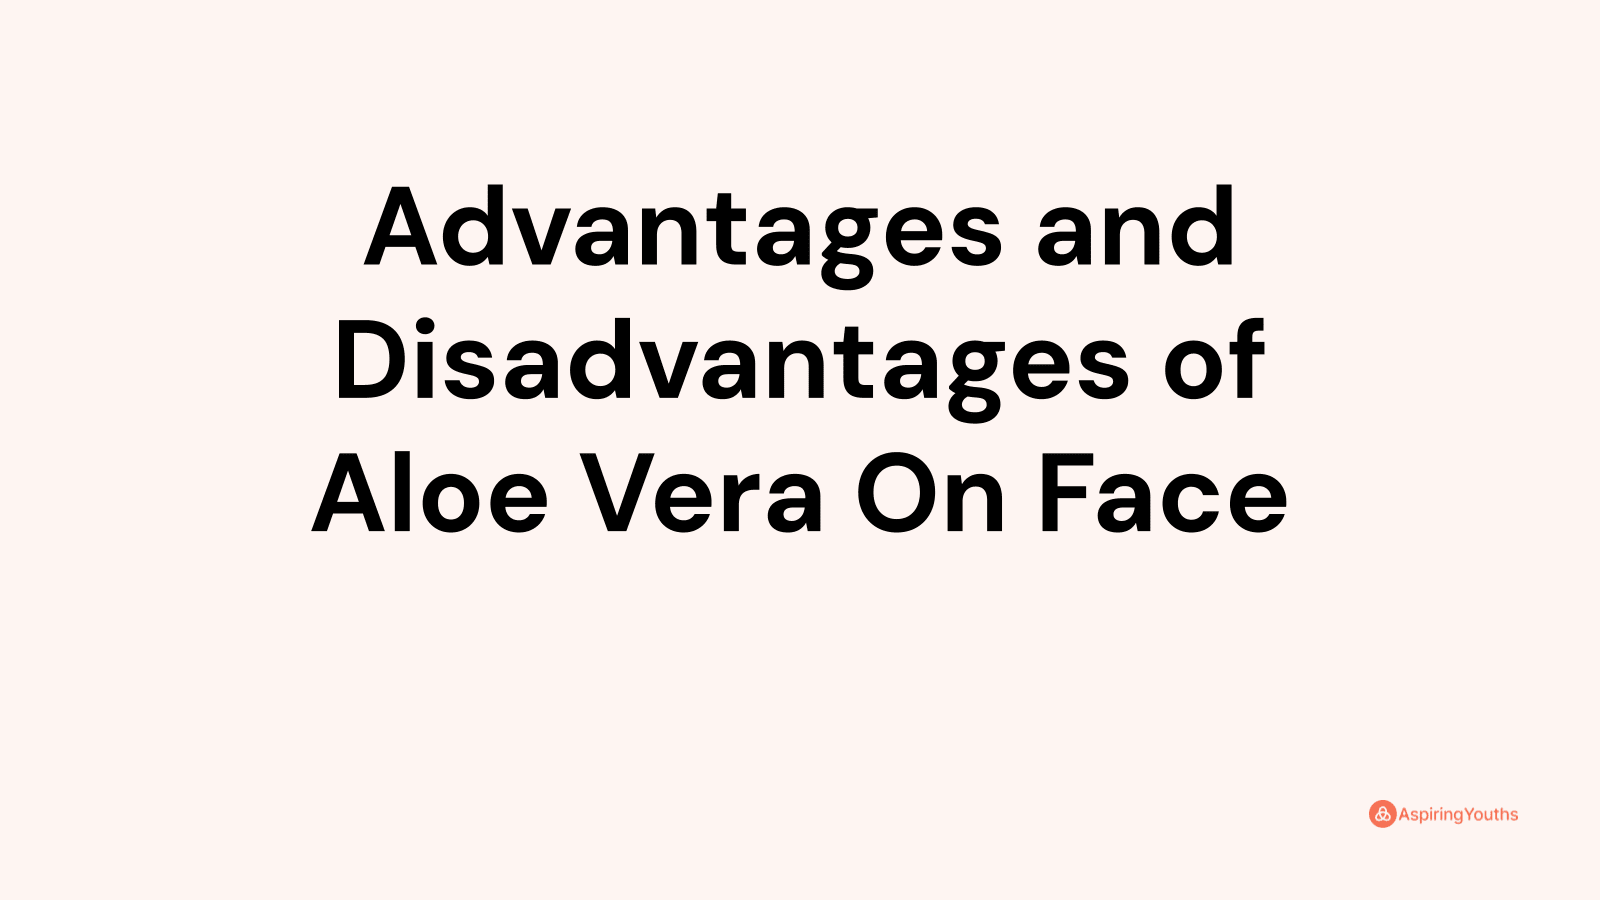 Advantages and disadvantages of Aloe Vera On Face